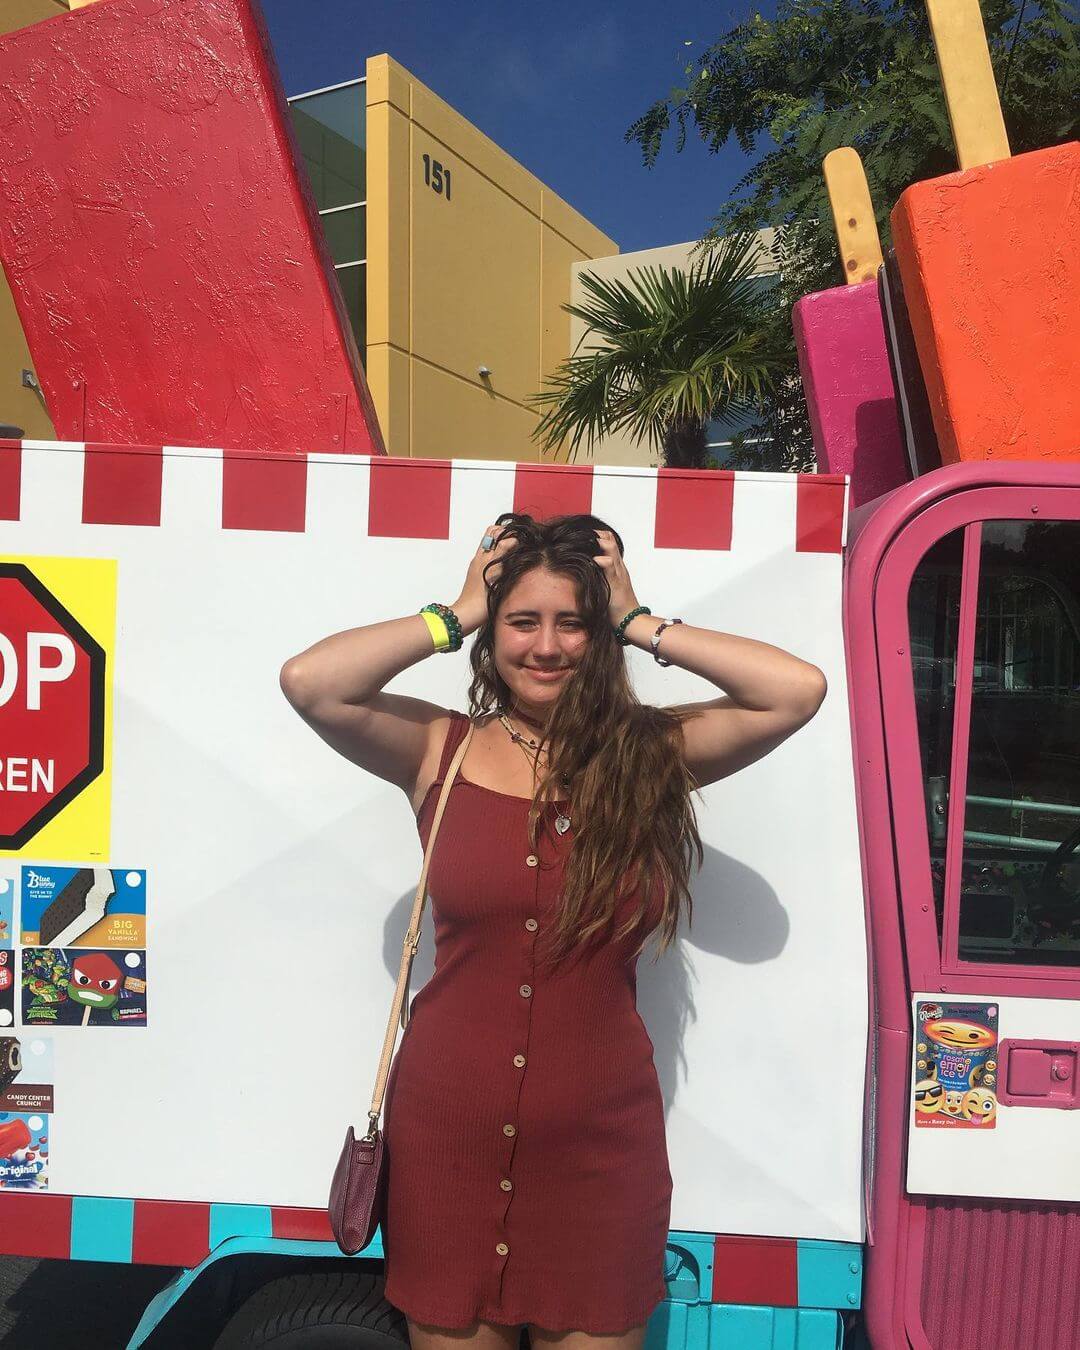 Lia Marie Johnson in Summer Outfit